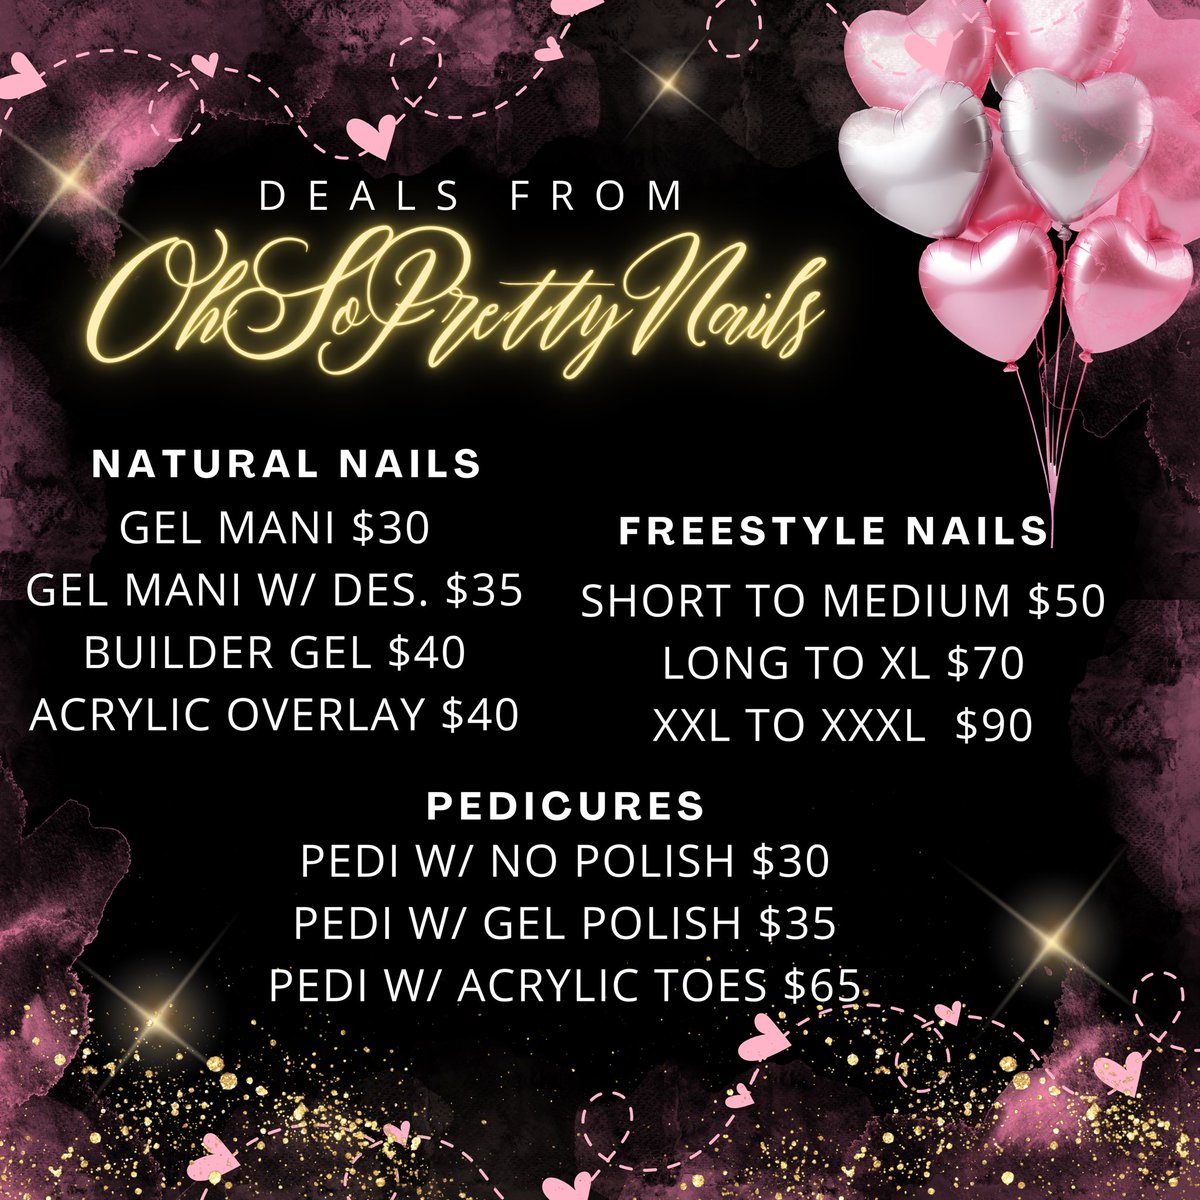 DOUBLE LOVE 💞💝🔥💇‍♀️💅 For the entire month of February! TEXT (947) 886-0711 💌💘💅 📍 25240 Lahser Rd Southfield, MI 48033